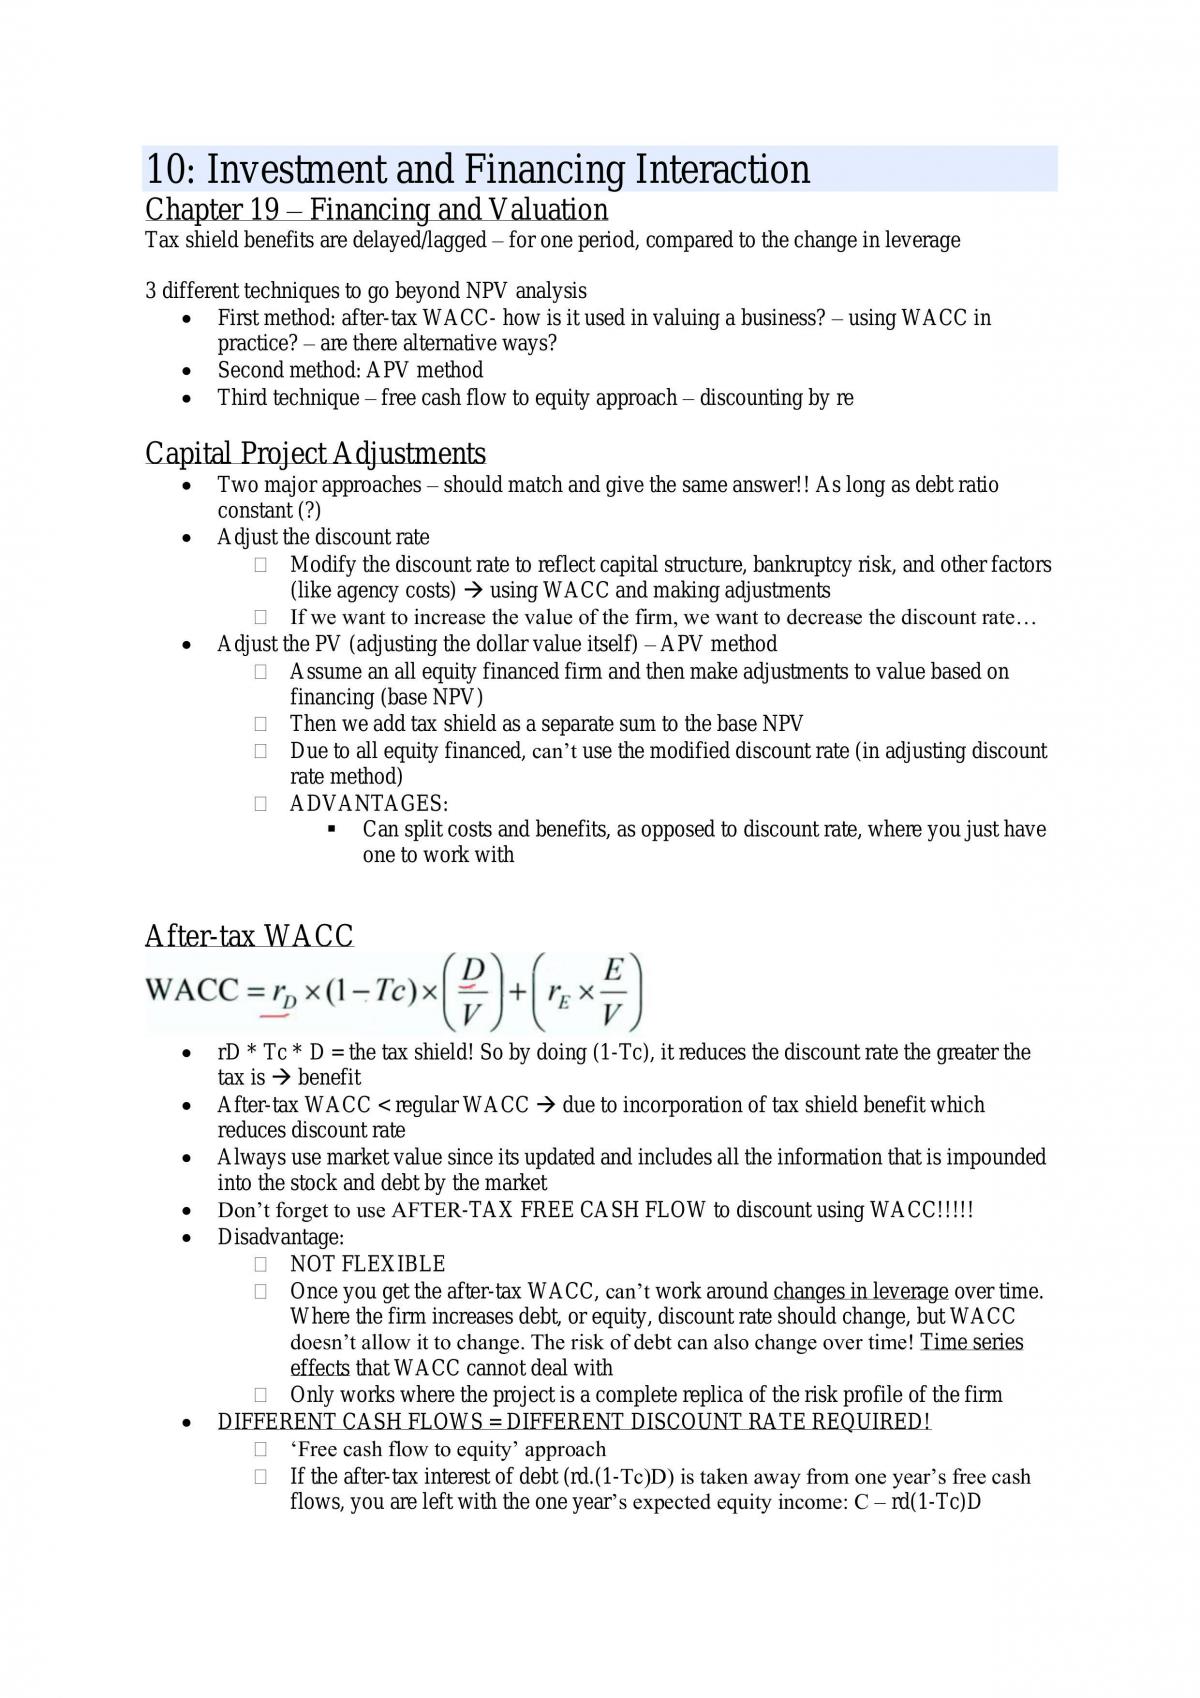 FINC2012 Finals Study Notes - Page 37